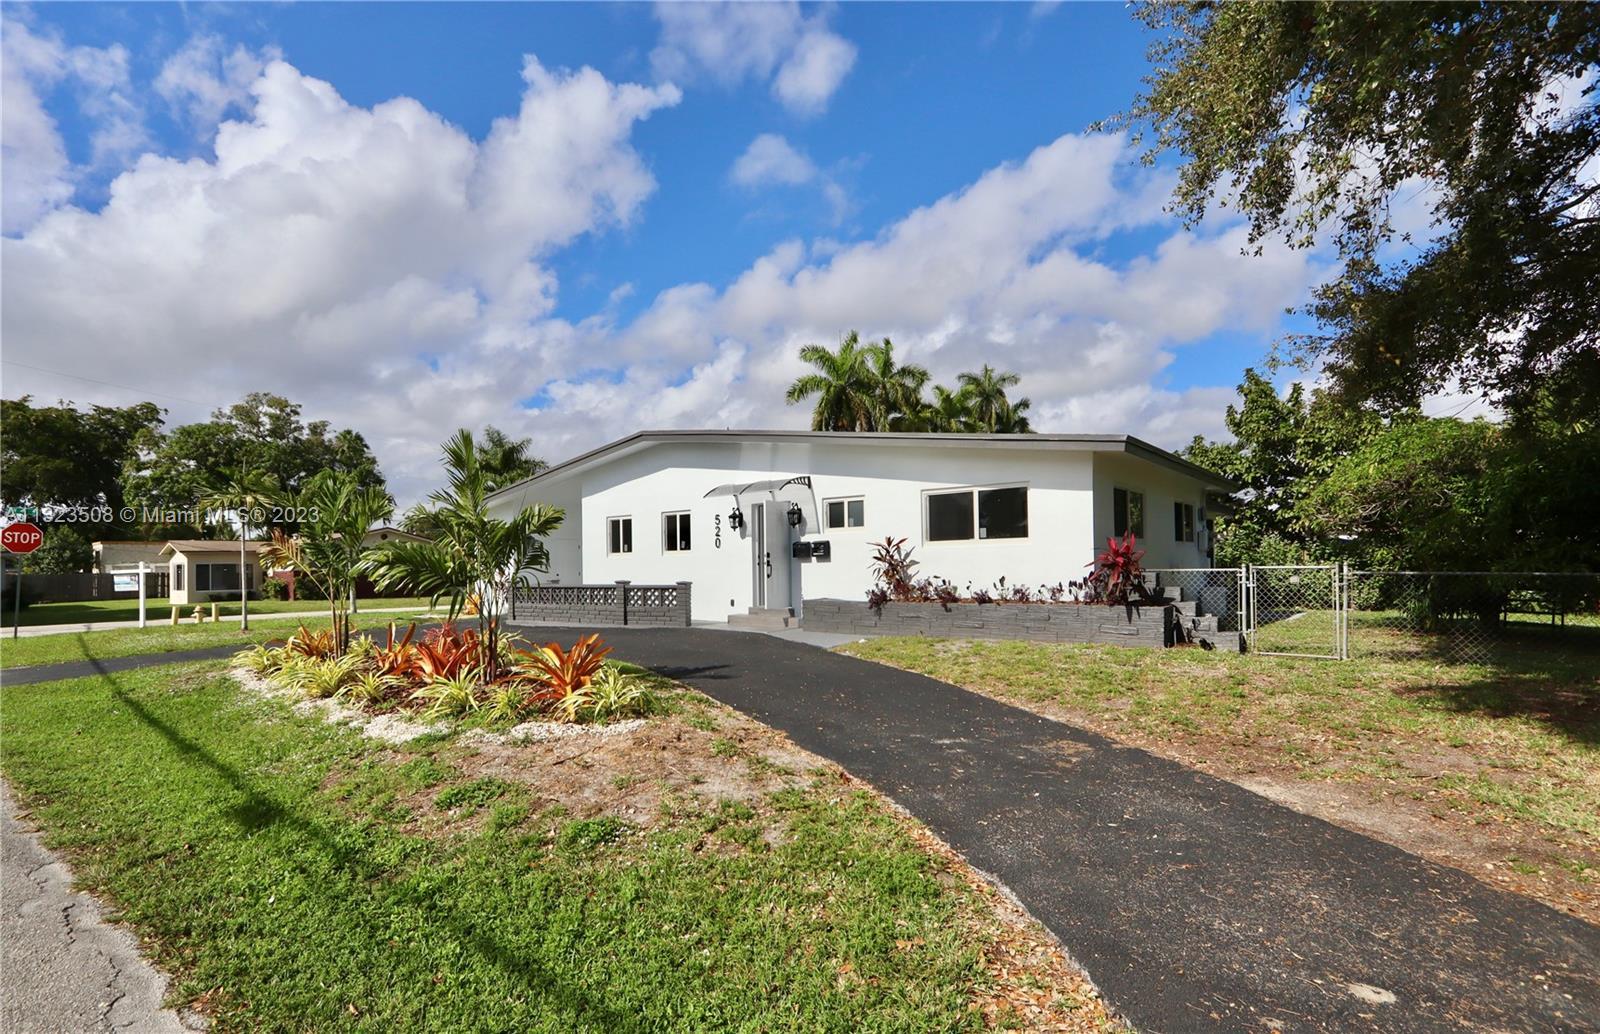 HALLANDALE BEACH INVESTOR WANTED FOR THIS TOTALLY REMODELED MODERN DUPLEX ON A LARGE CORNER LOT! 3 B